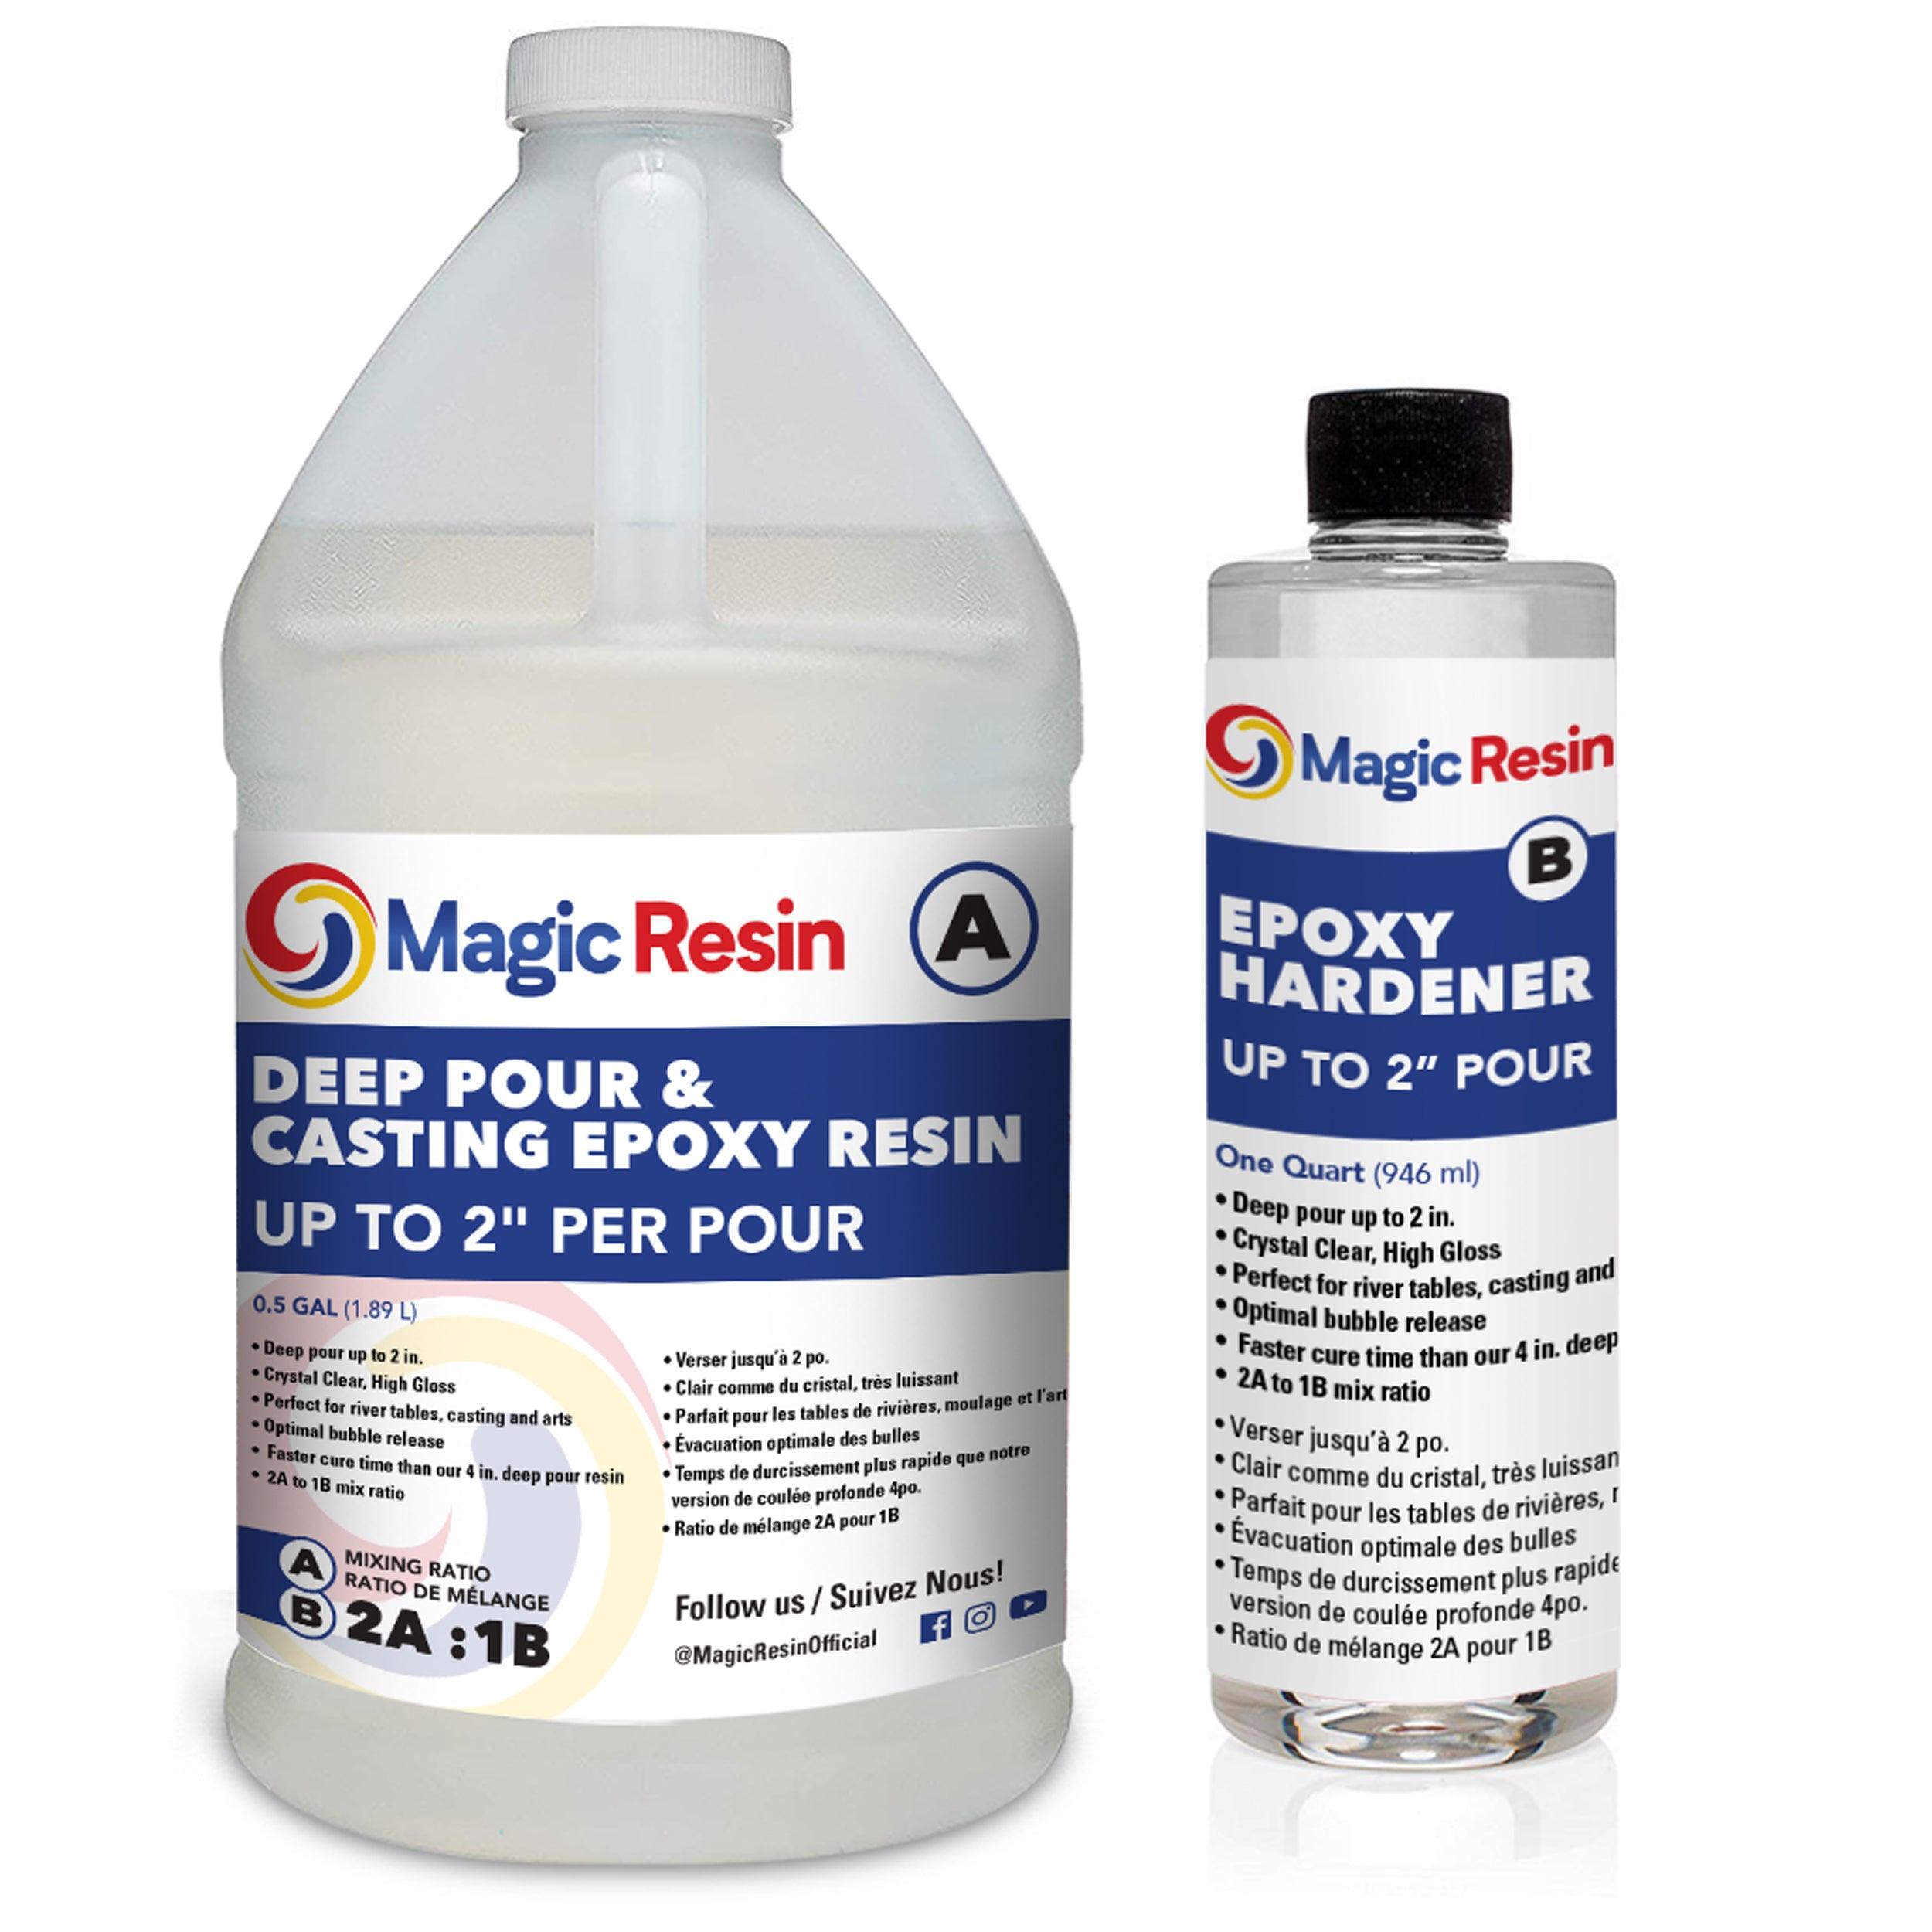 magicresin 2:1 resin is the best deep pour resin I've ever used